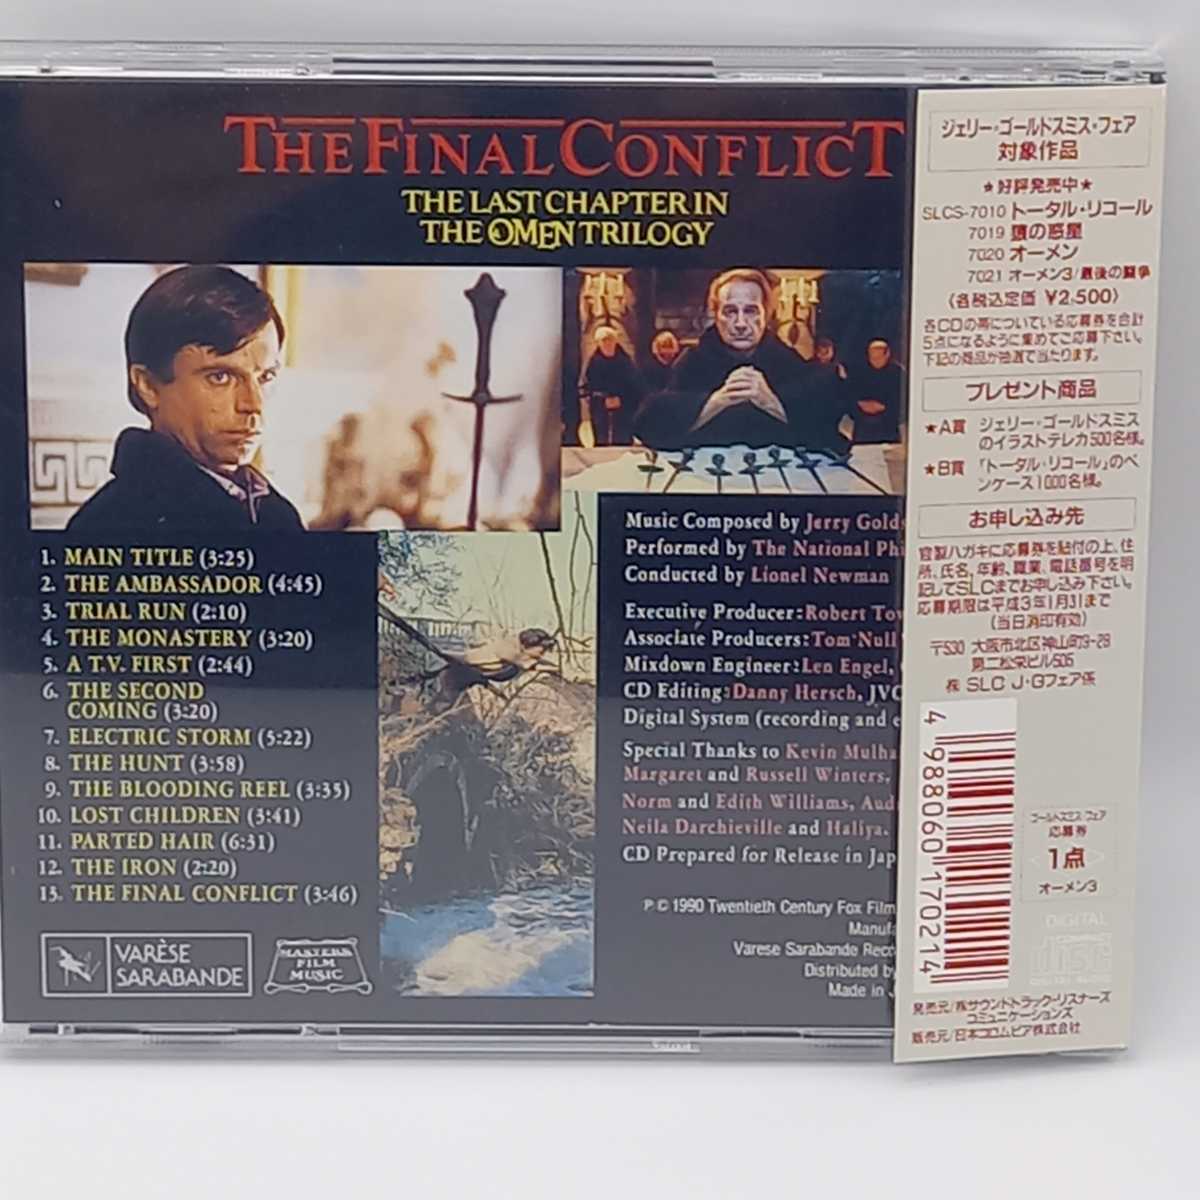 C-0639* used CD with belt *o- men last. ..OST soundtrack THE FINAL CONFLICT THE LAST CHAPTER IN THE OMEN TRILOGY